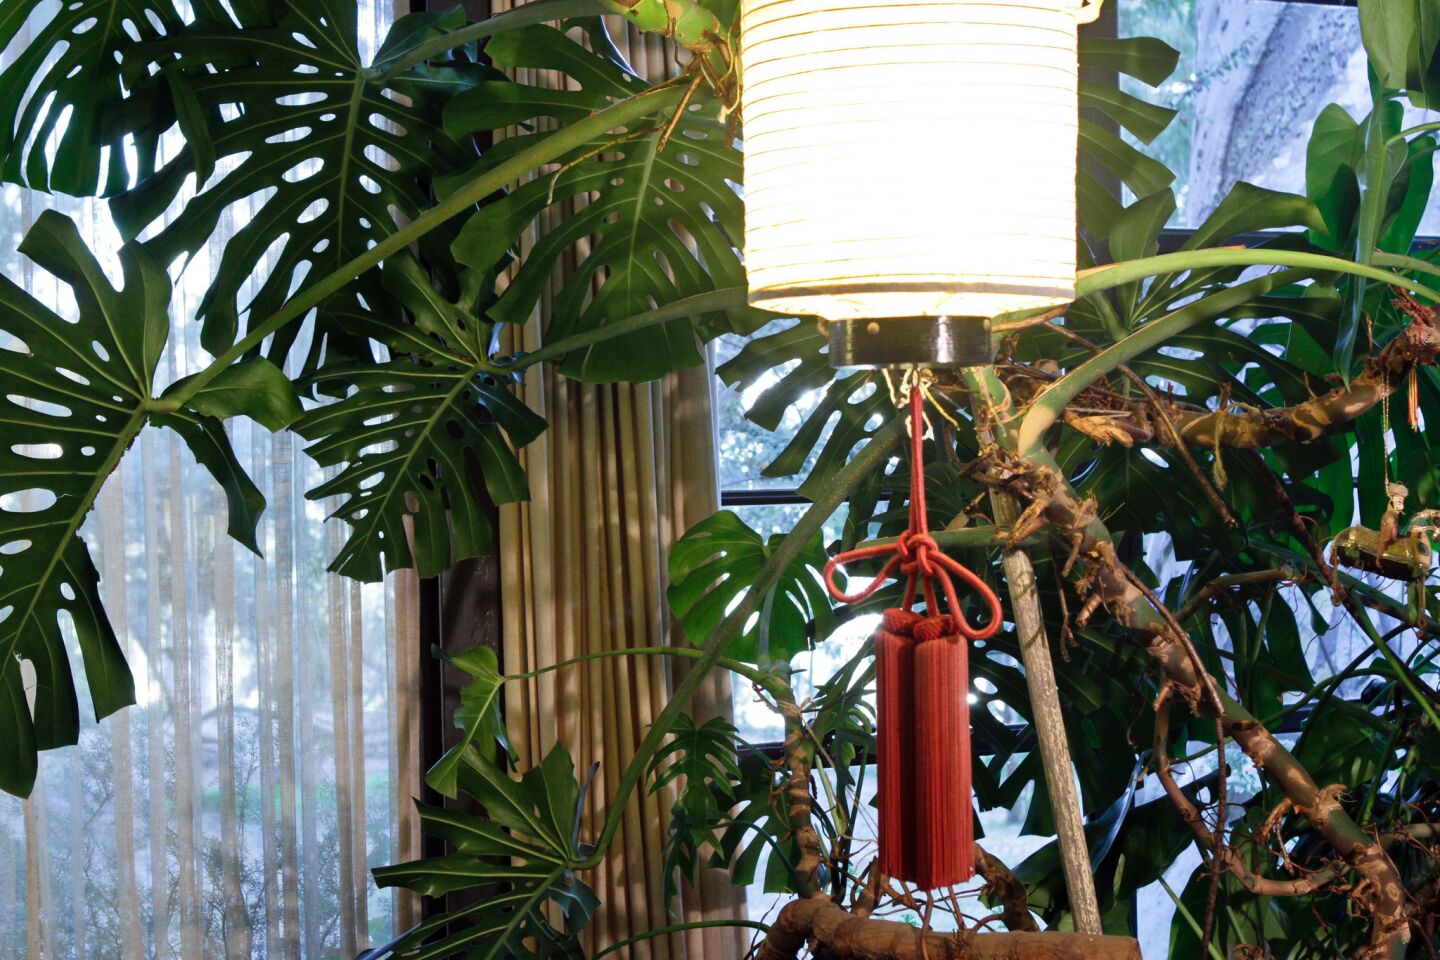 A Chinese lantern hangs in front of one of the same house plants that, quite amazingly, can be seen in historic photos of the house. Since the Eameses' deaths – Charles in 1978, Ray exactly 10 years later, to the day – a caretaker has kept the house in a state of suspended animation, as though Ray has simply the left the house on an errand.